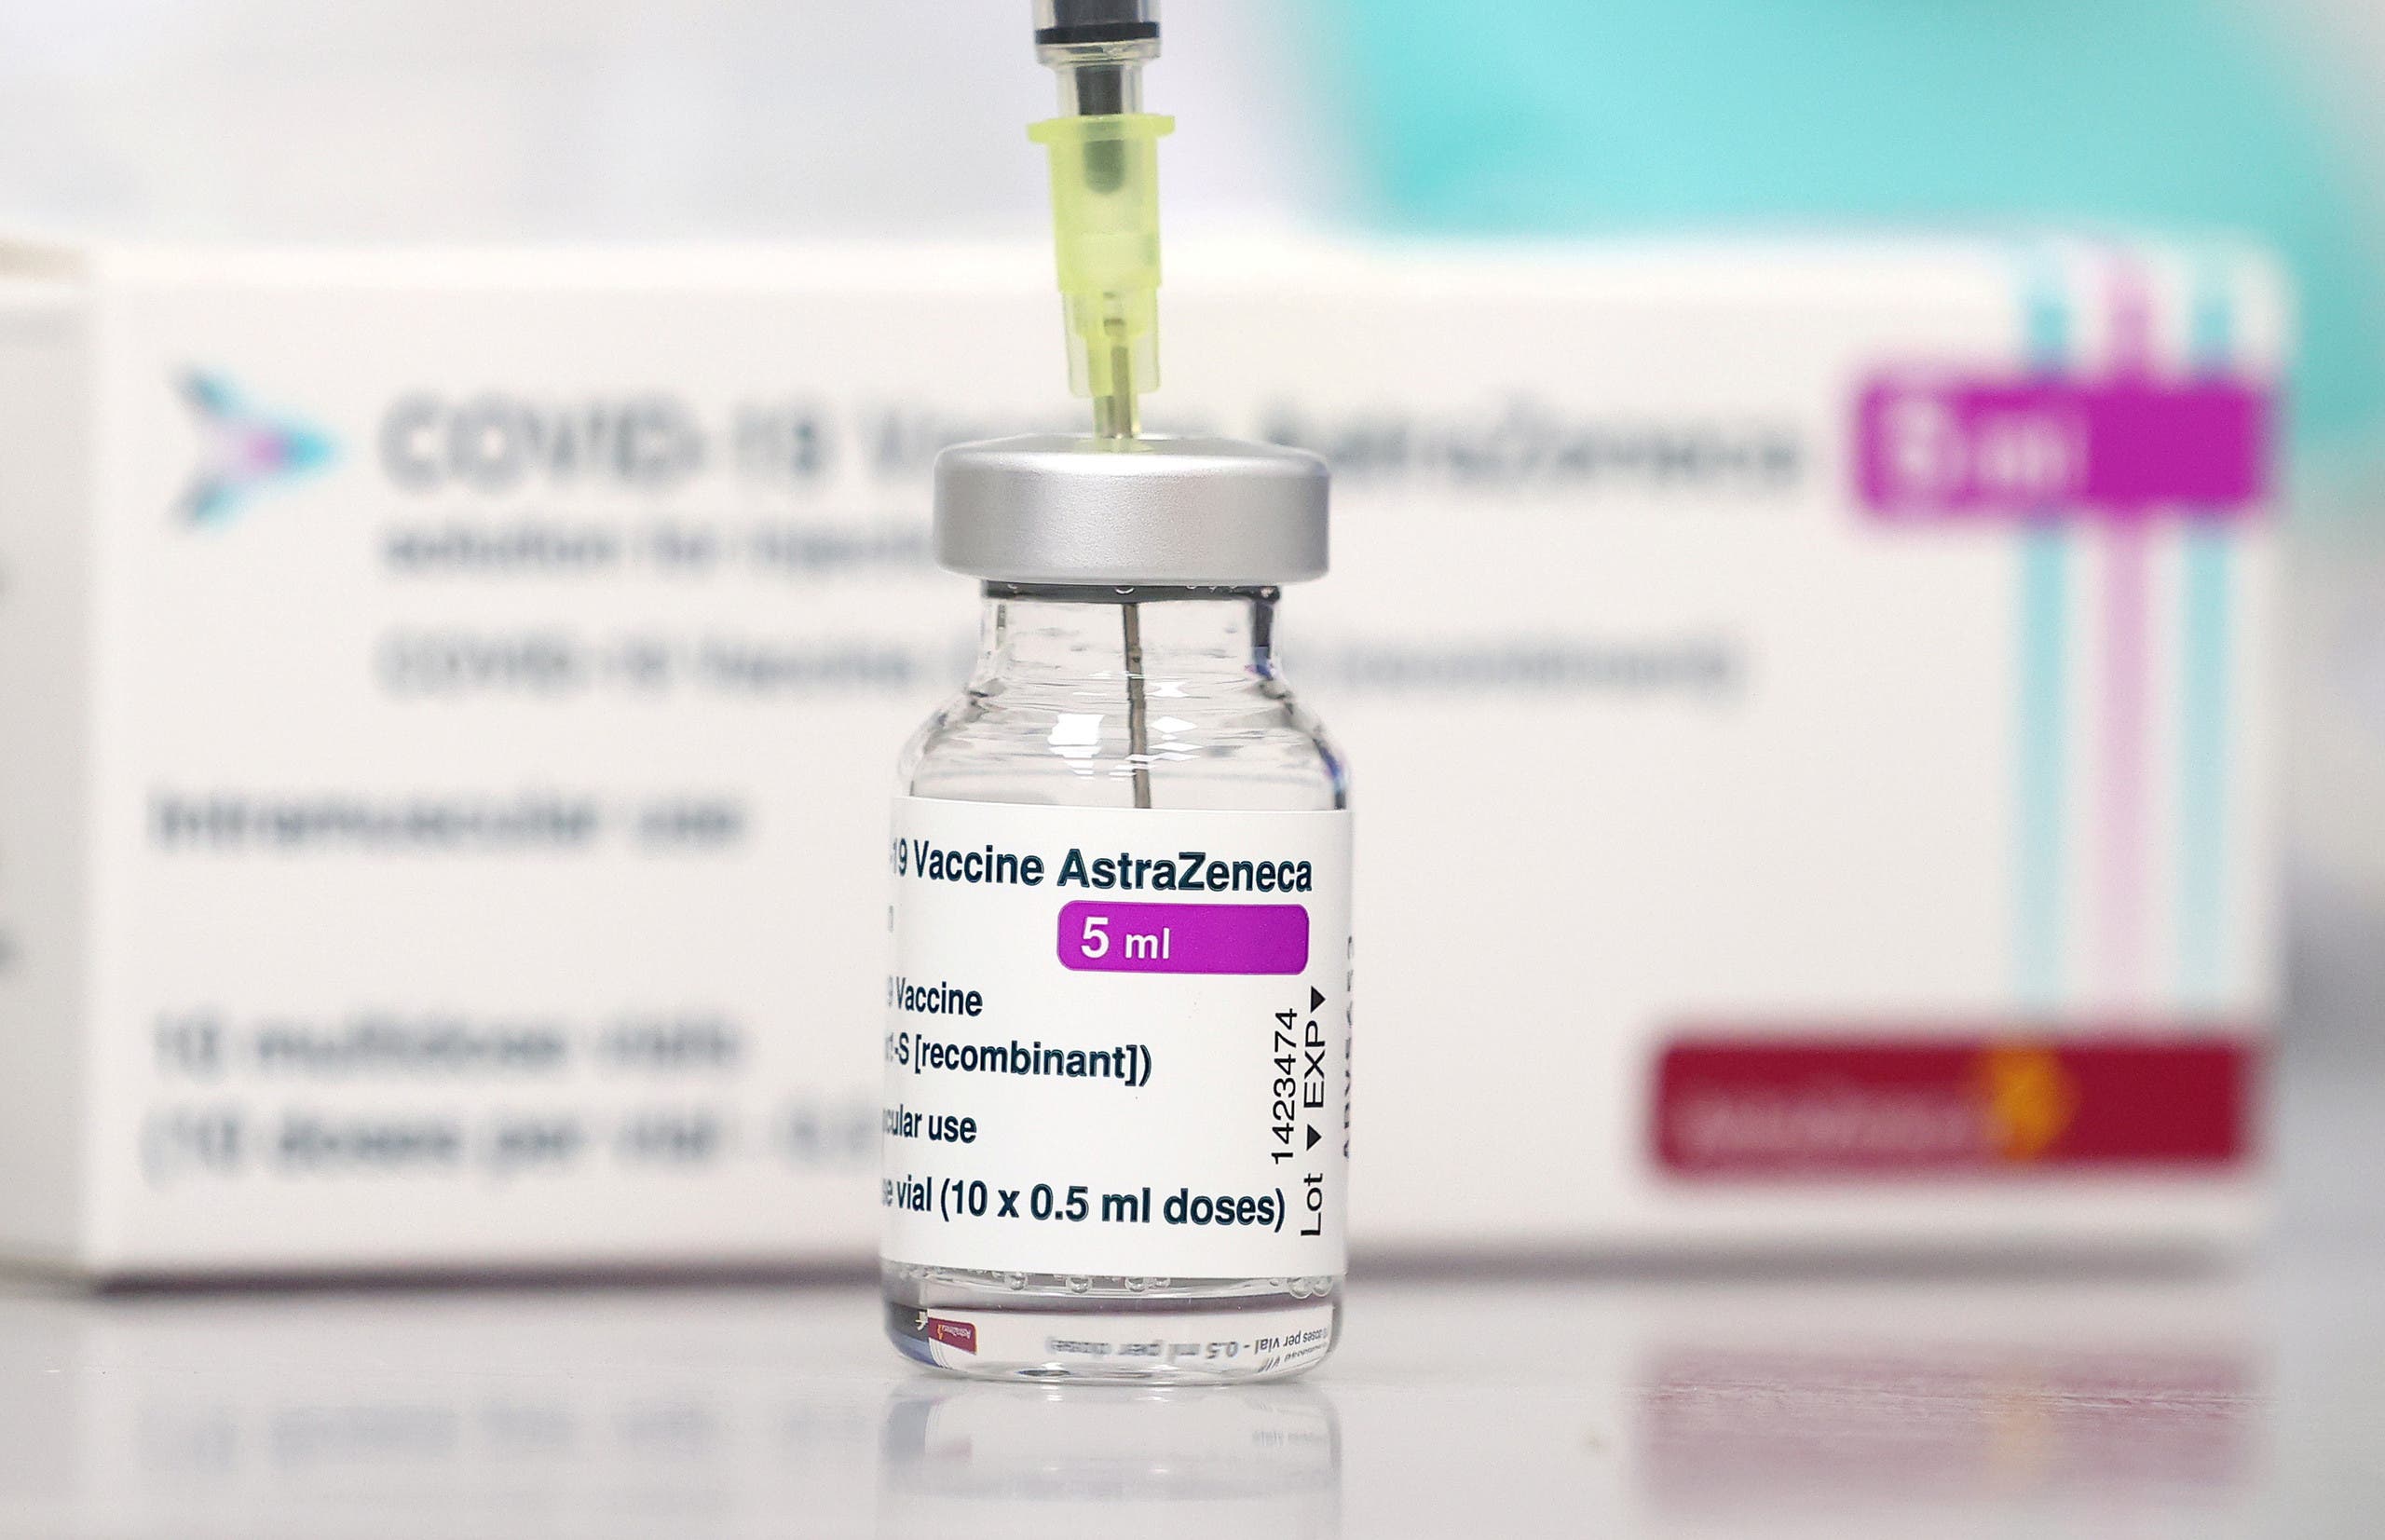 A vial of the AstraZeneca COVID-19 vaccine is seen at the general practice of Doctor Claudia Schramm as the spread of the coronavirus disease (COVID-19) continues, in Maintal, Germany, March 24, 2021. (File photo: Reuters)